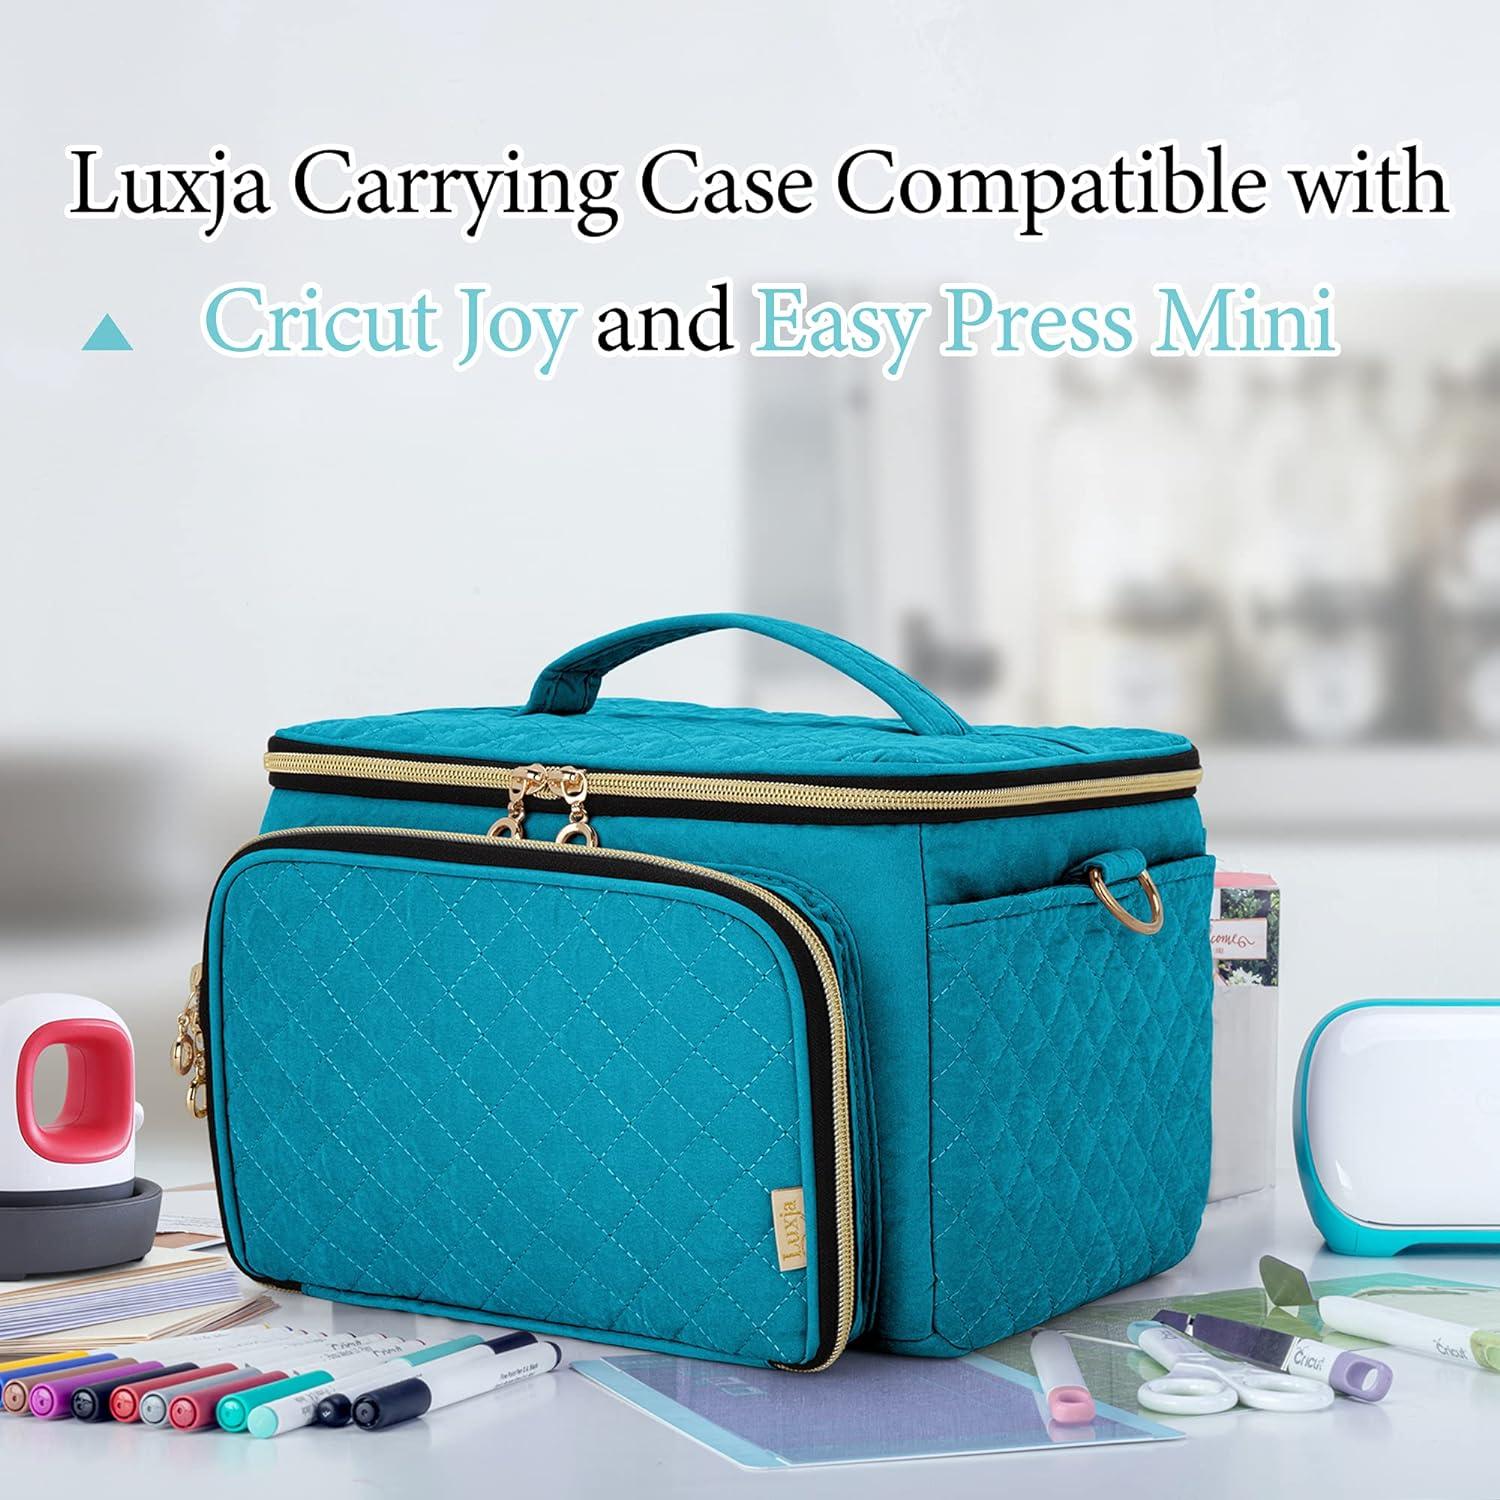 LUXJA Carrying Case Compatible with Cricut Joy and Easy Press Mini,  Carrying Bag with Supplies Storage Sections, Teal